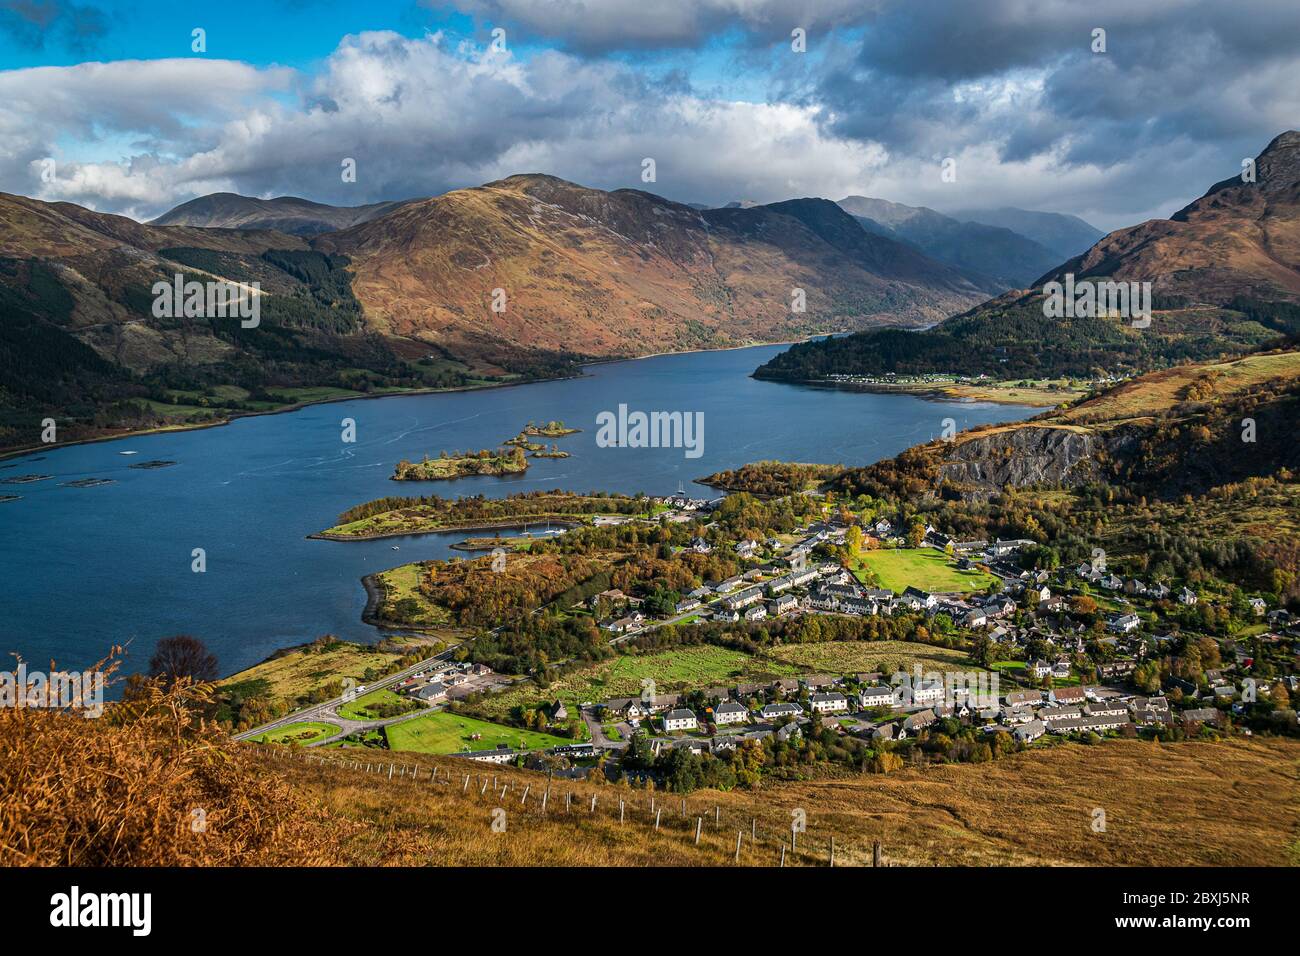 Autumn view of Scottish village of Ballachulish and Loch Leven in famous Glen Coe in Scottish Highlands. Stock Photo